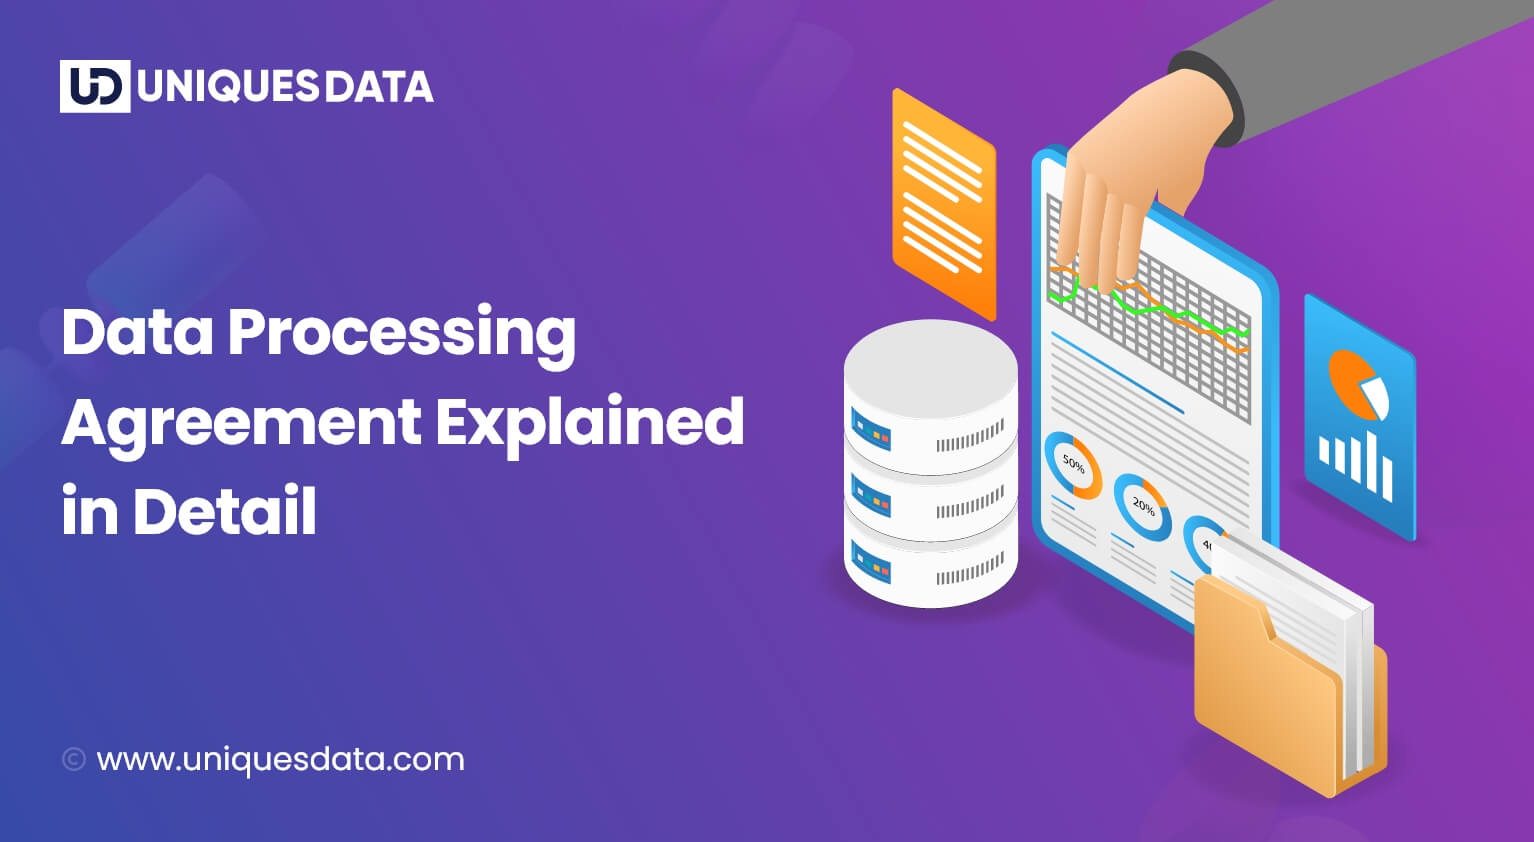 DPA - Data Processing Agreement Explained in Detail